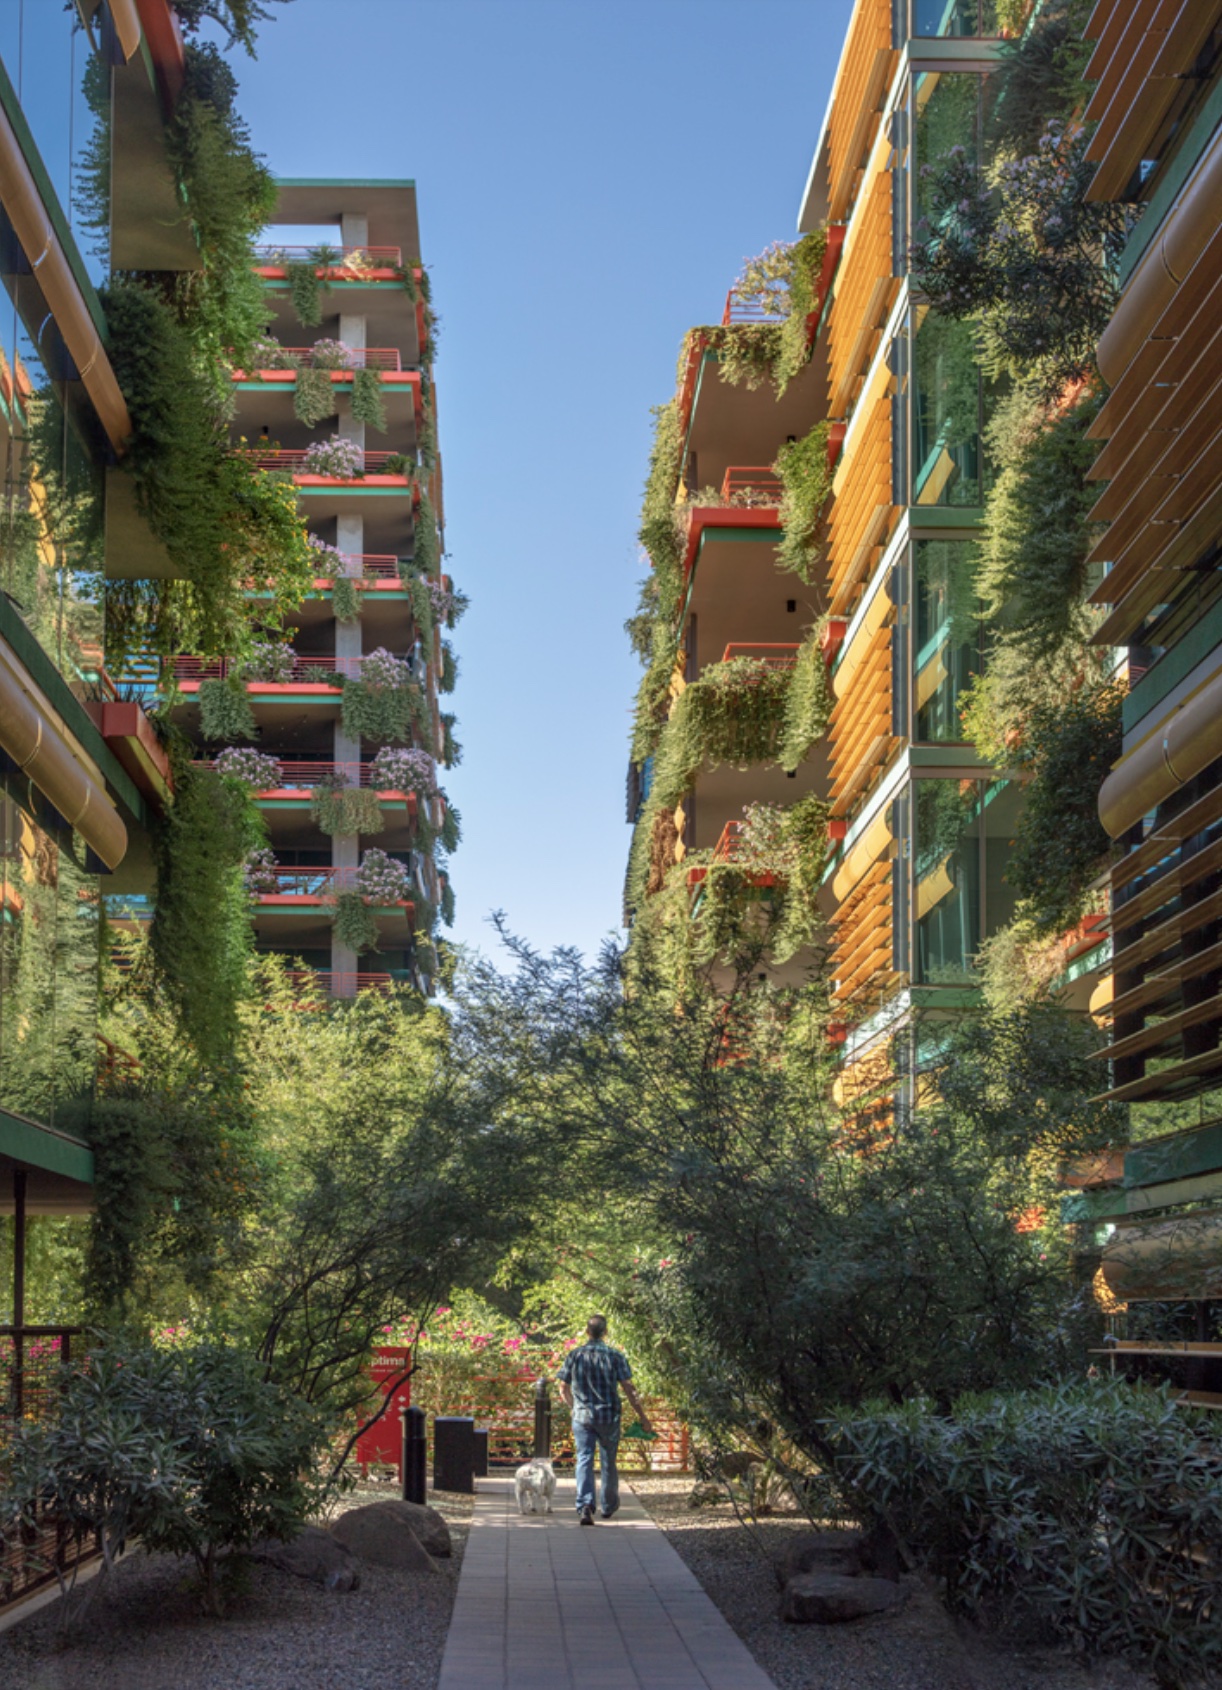 Photos of this Award-Winning, Plant-Filled Apartment Complex has Twitter Users Speechless: ‘I Thought This Was Ai-Generated’